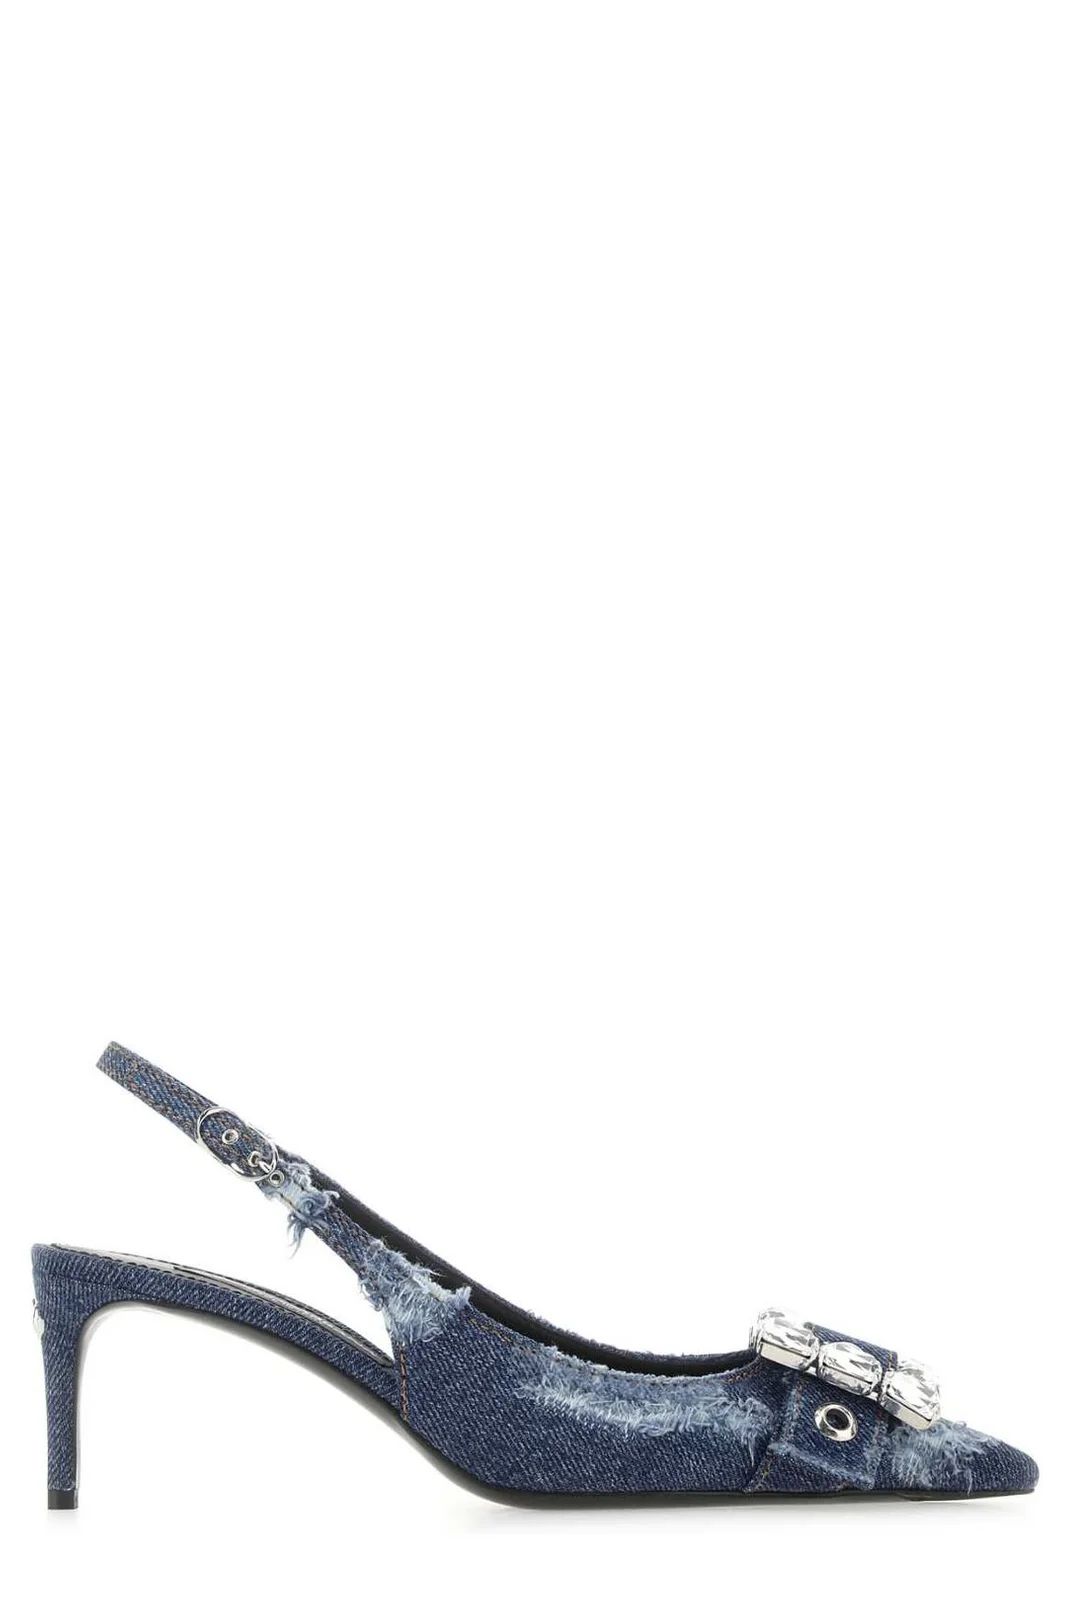 Dolce & Gabbana Pointed-Toe Distressed Pumps | Cettire Global